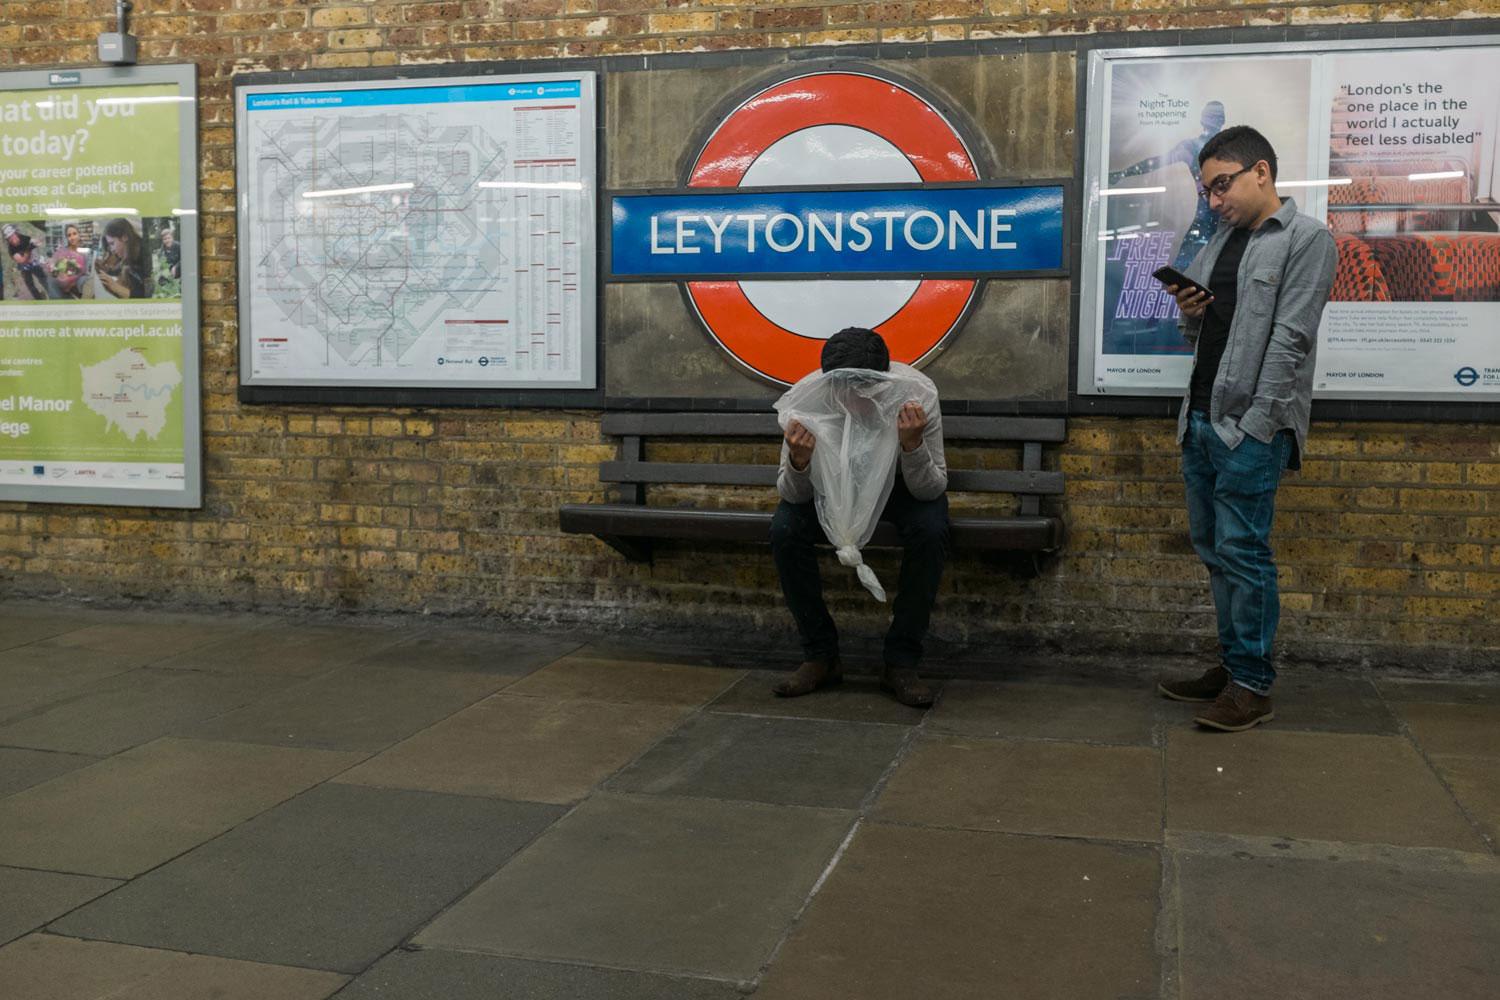 Only 36 minutes into the first ever night service on the Central Line and some revellers were finding it all too exciting. In this image a man gazes at his phone while his friend is sick into a garbage liner pinched from the platform.